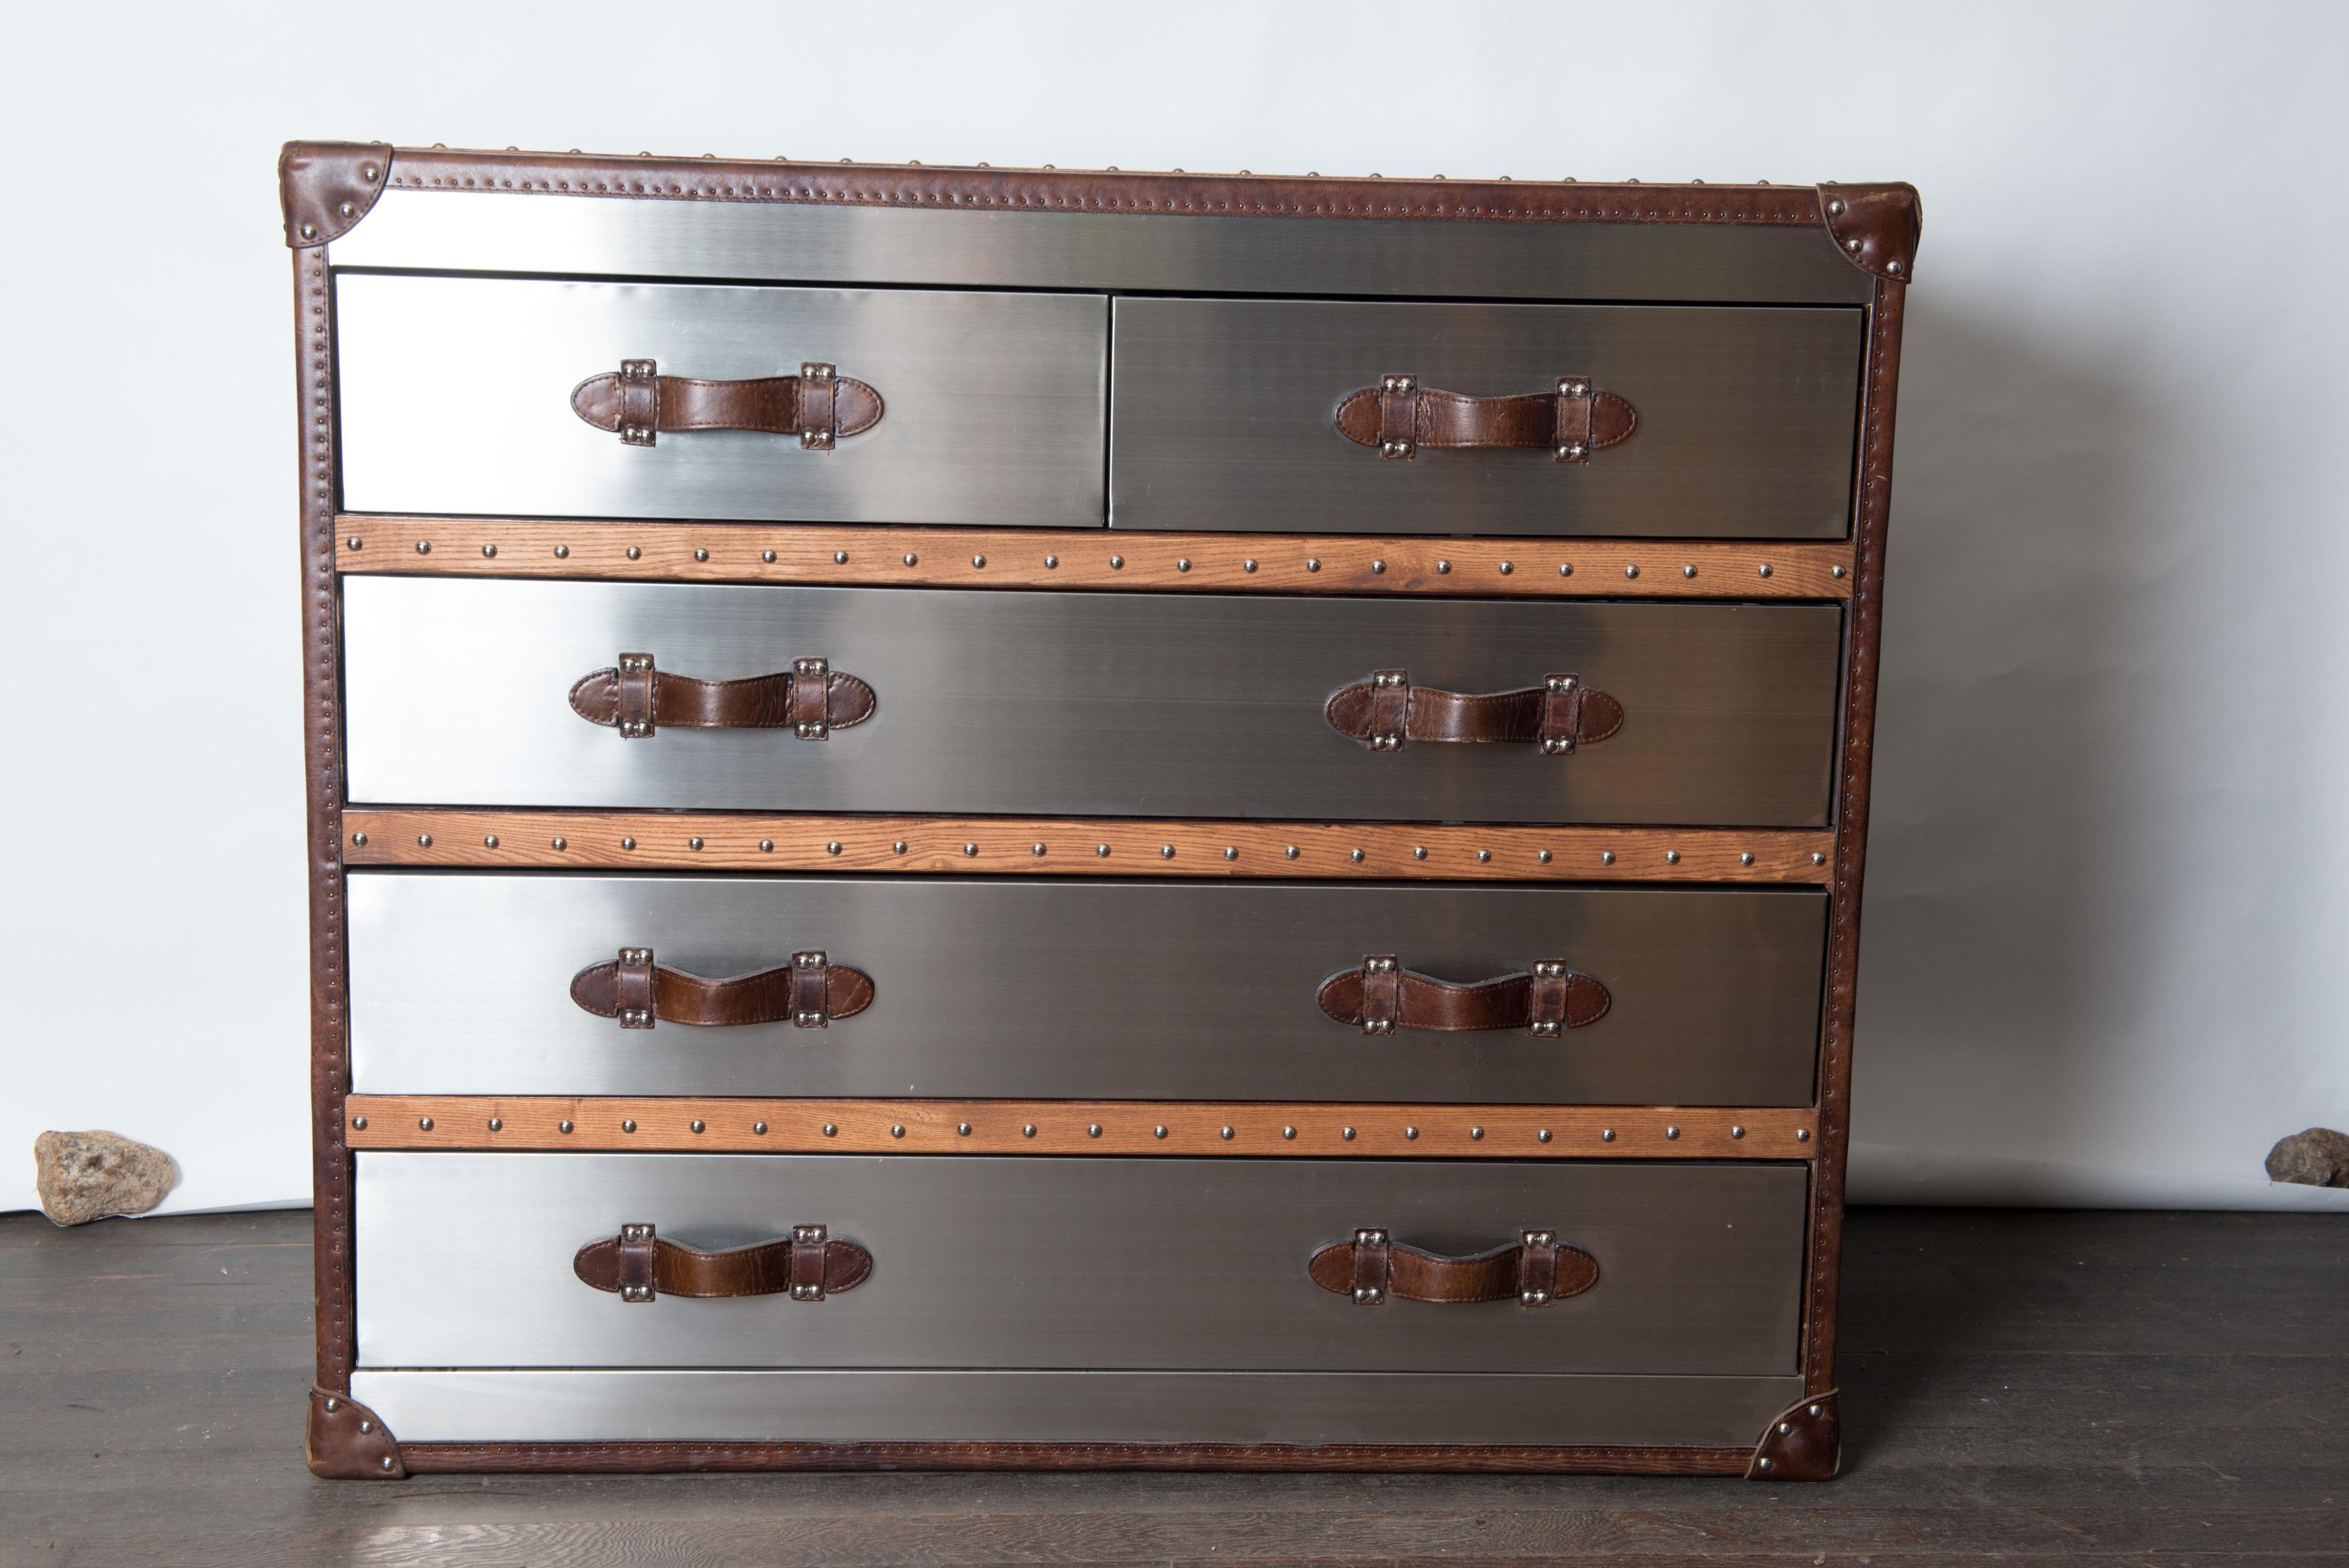 Italian custom made stainless steel, leather, wood, nailhead steamer trunk style chest of drawers. Extremely well crafted. Black interior drawers. The piece is weighted and quite substantial.